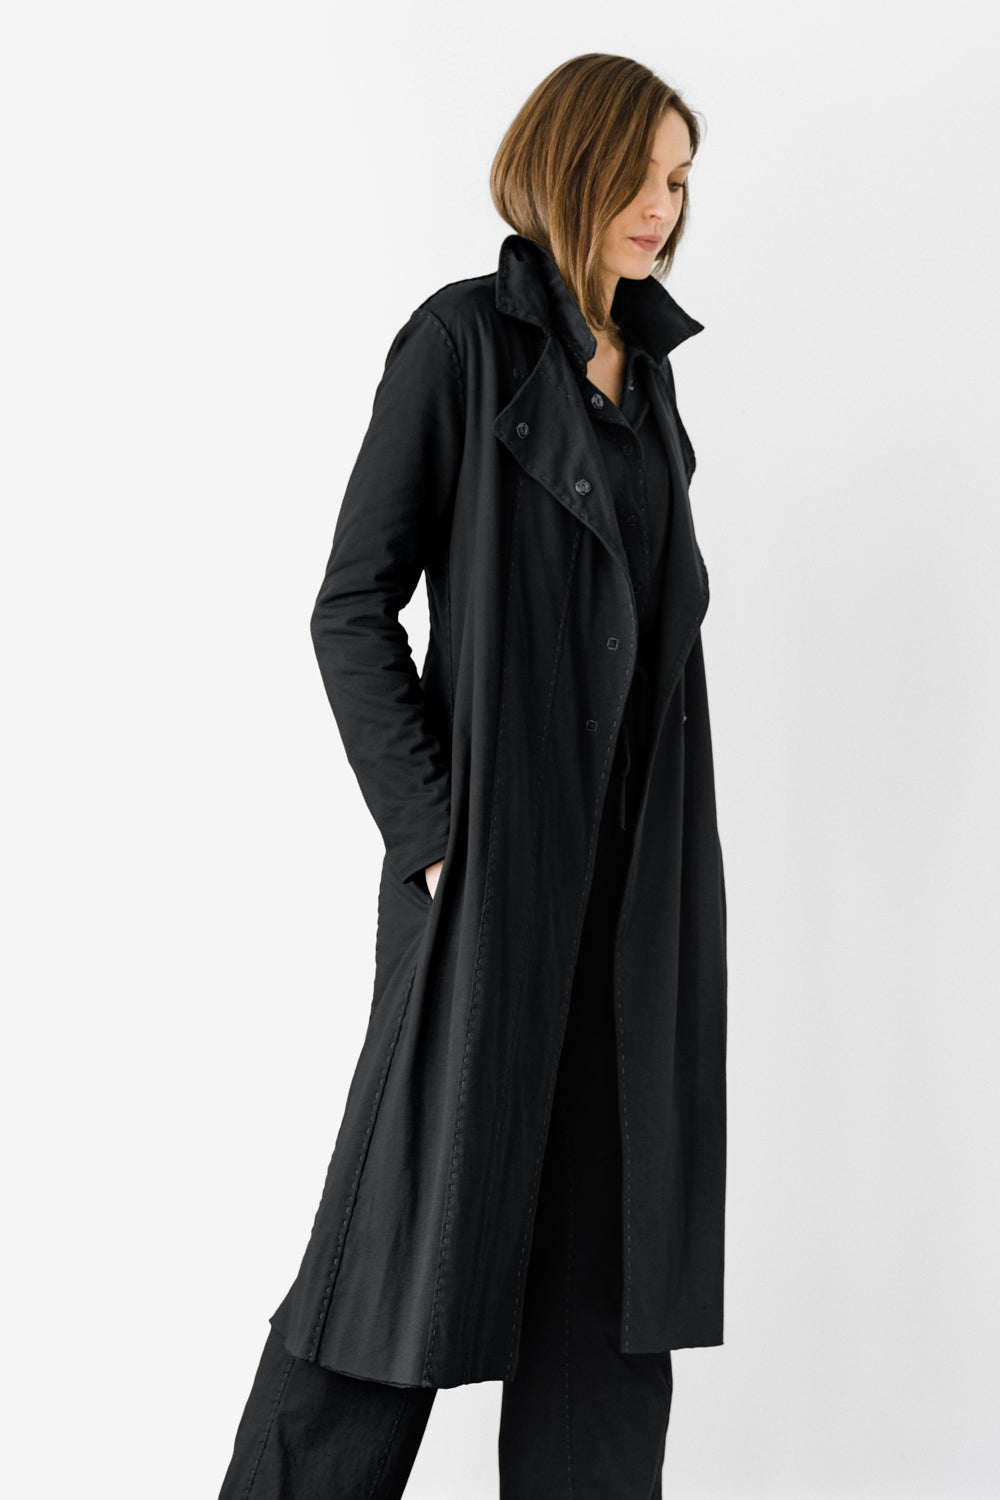 The School of Making Asymmetrical Trench in Black. Styled on Model.